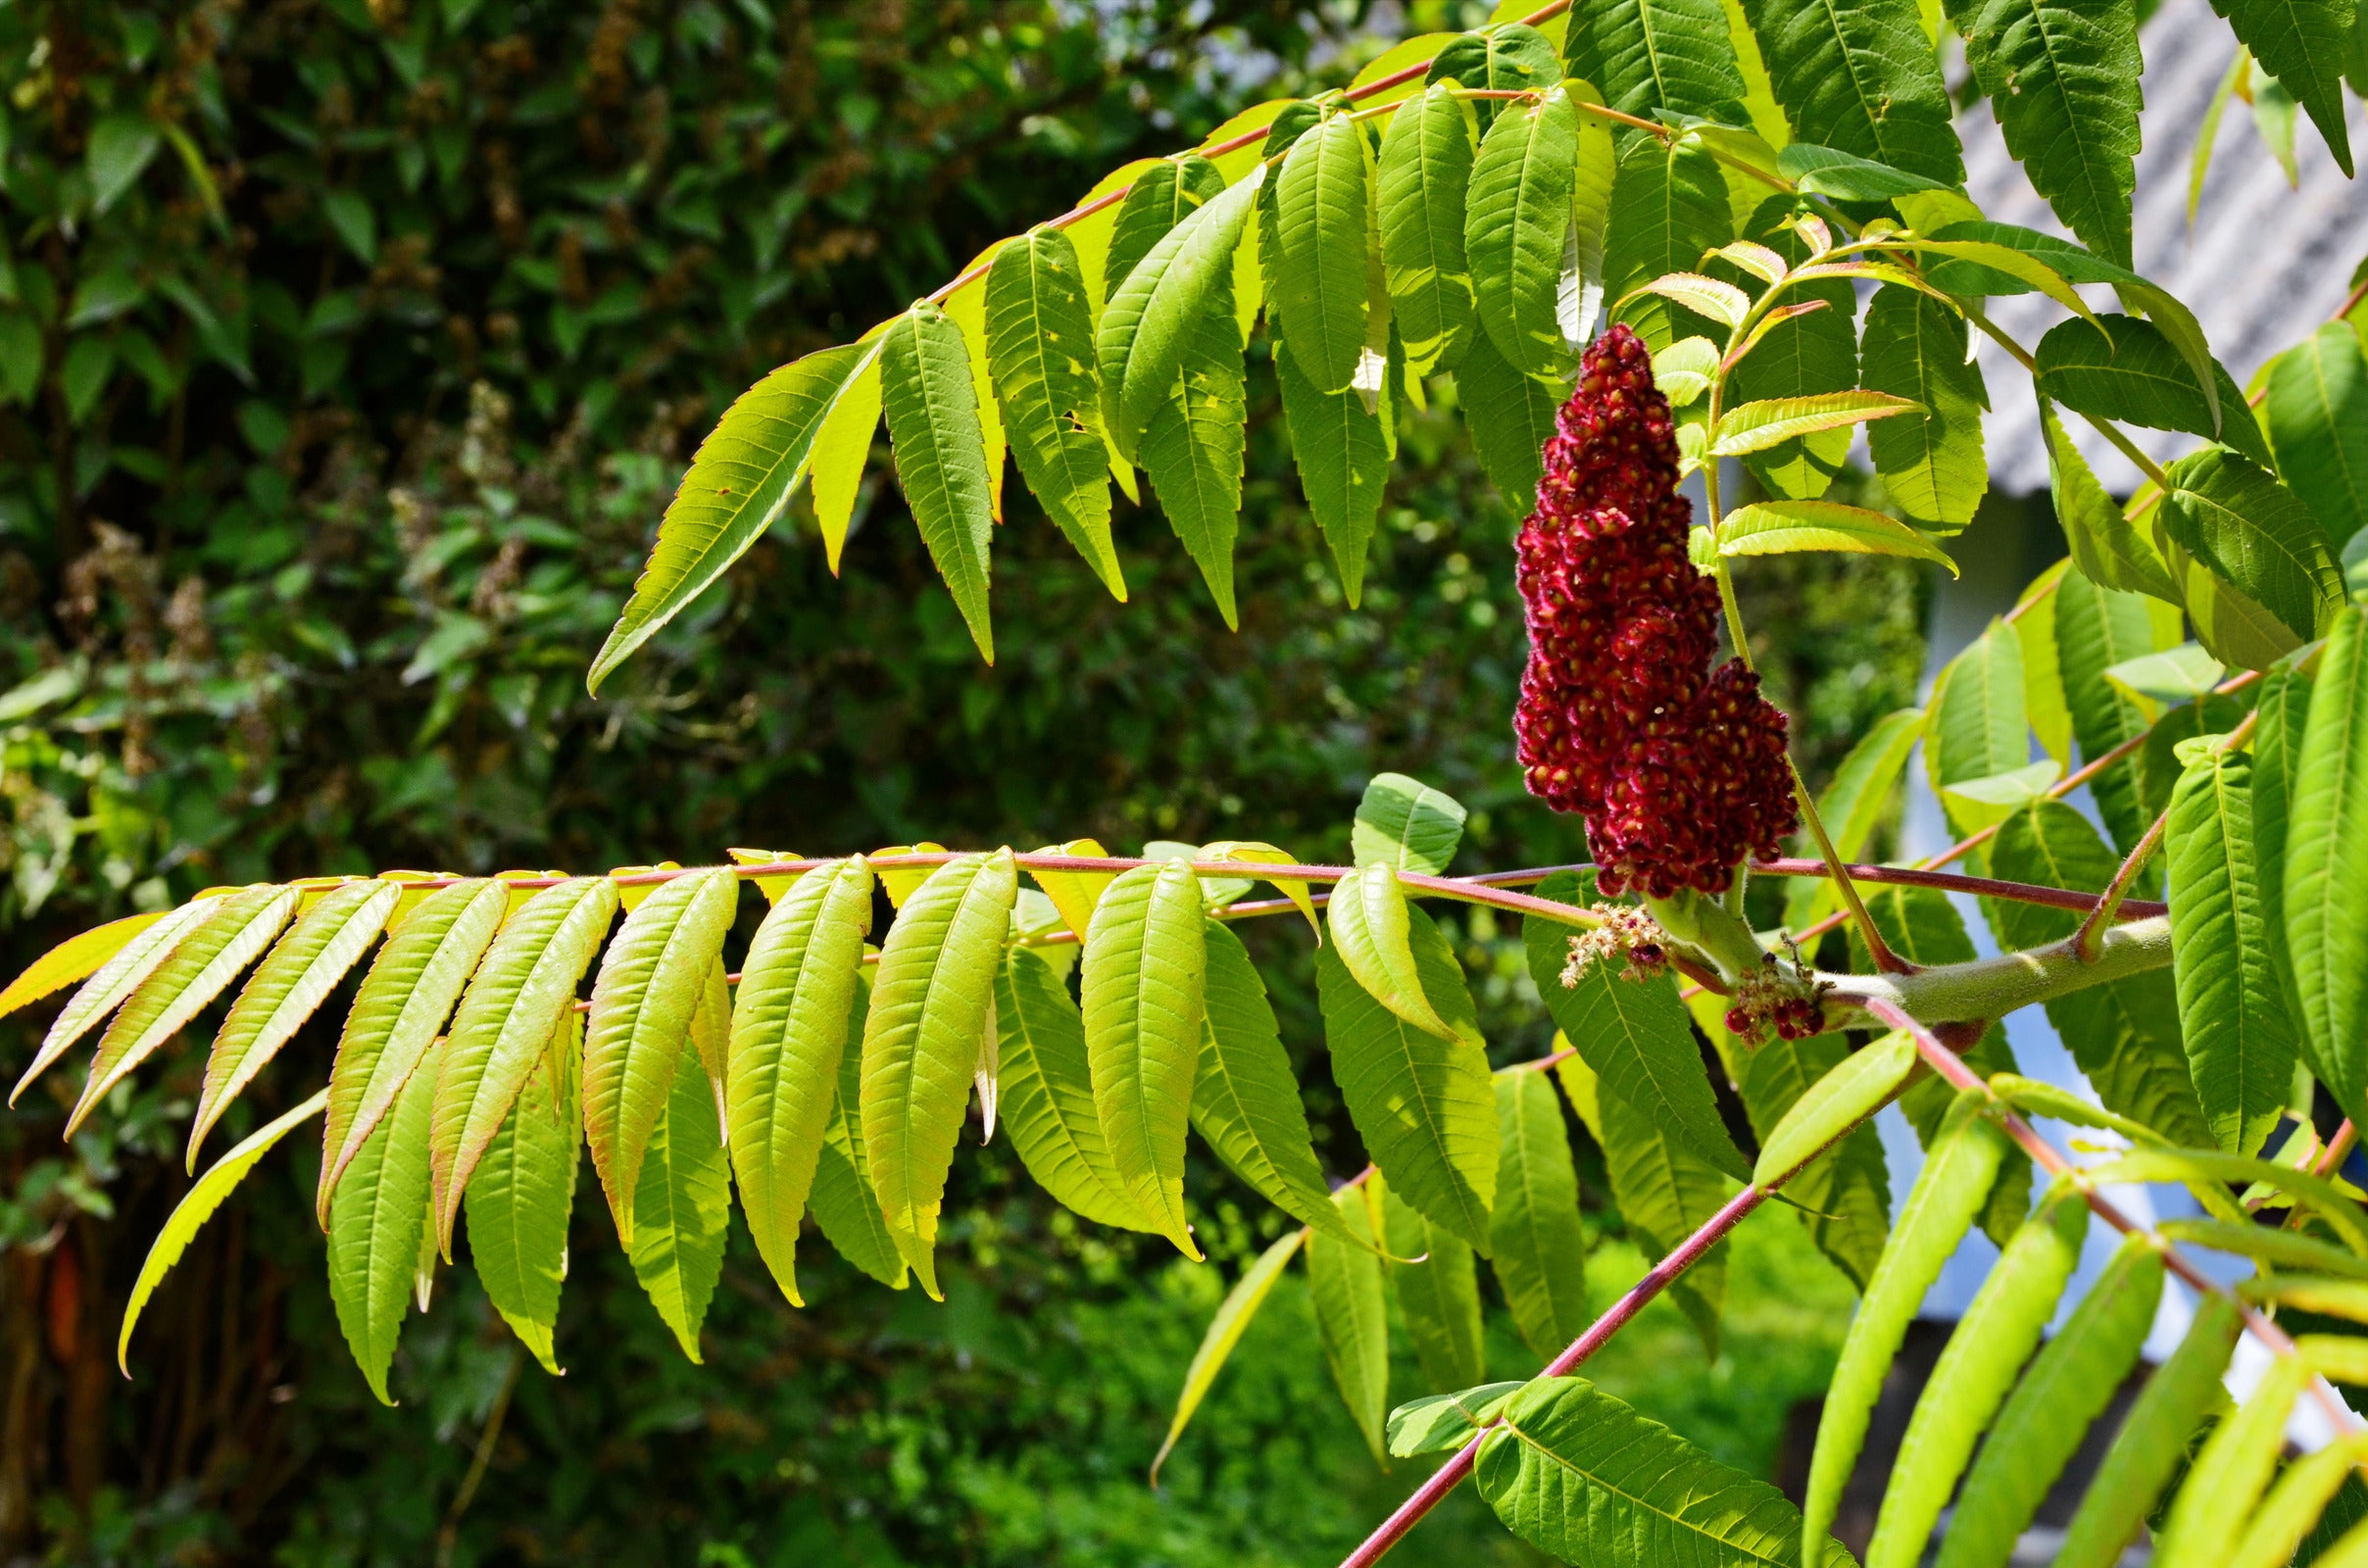 The poisonous root of the sumac plant: